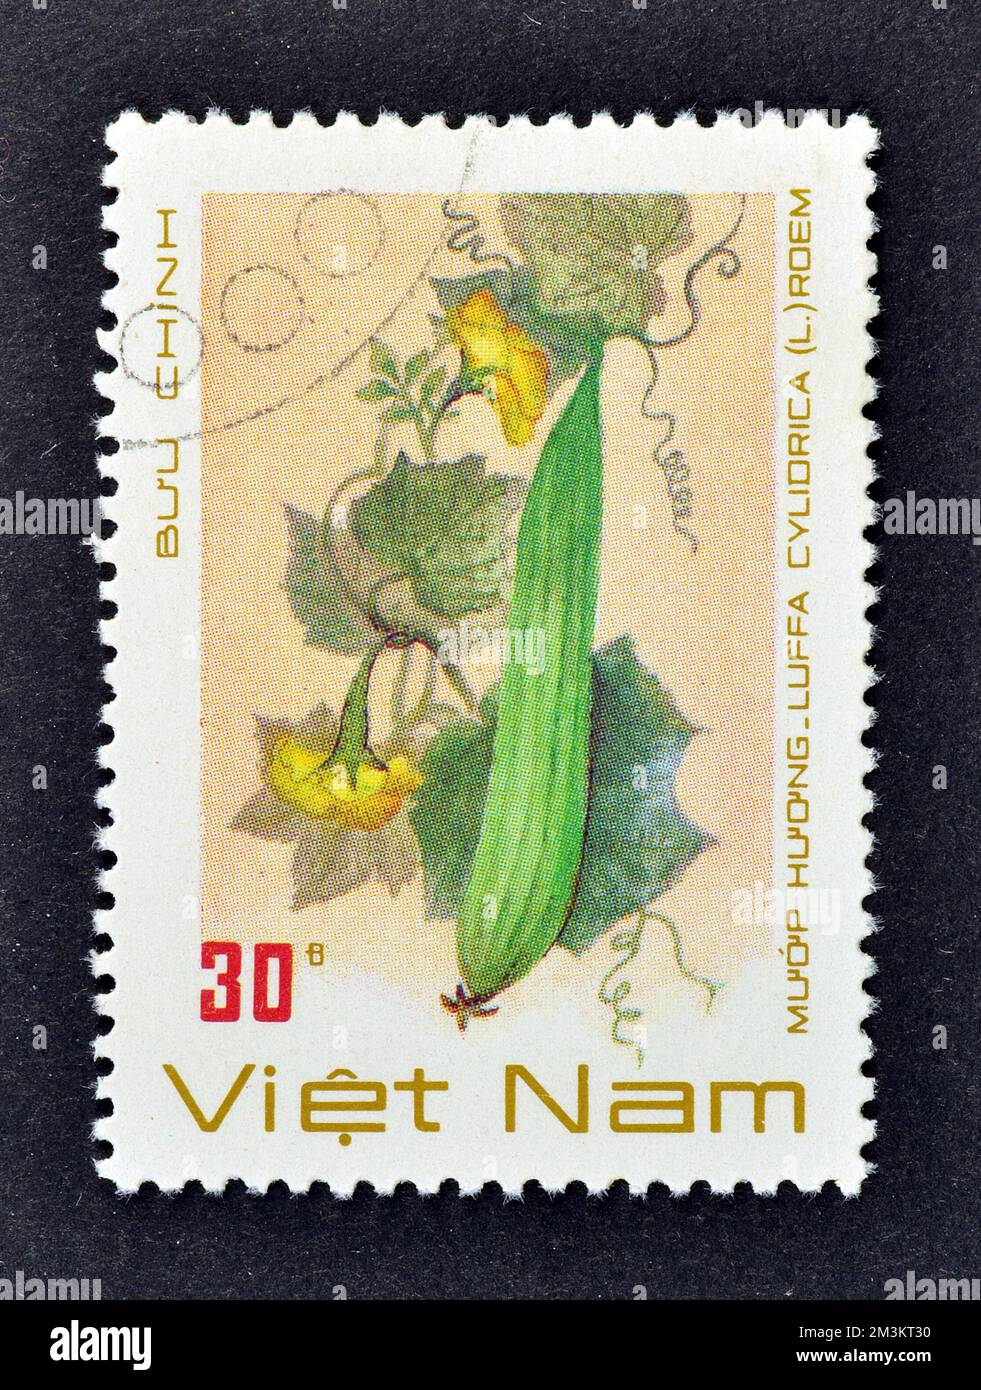 Cancelled postage stamp printed by Vietnam, that shows Climbing okra, Dish-cloth Gourd, Dishrag gourd, Egyptian luffa, Rag Gourd, Smooth luffa, Spong Stock Photo